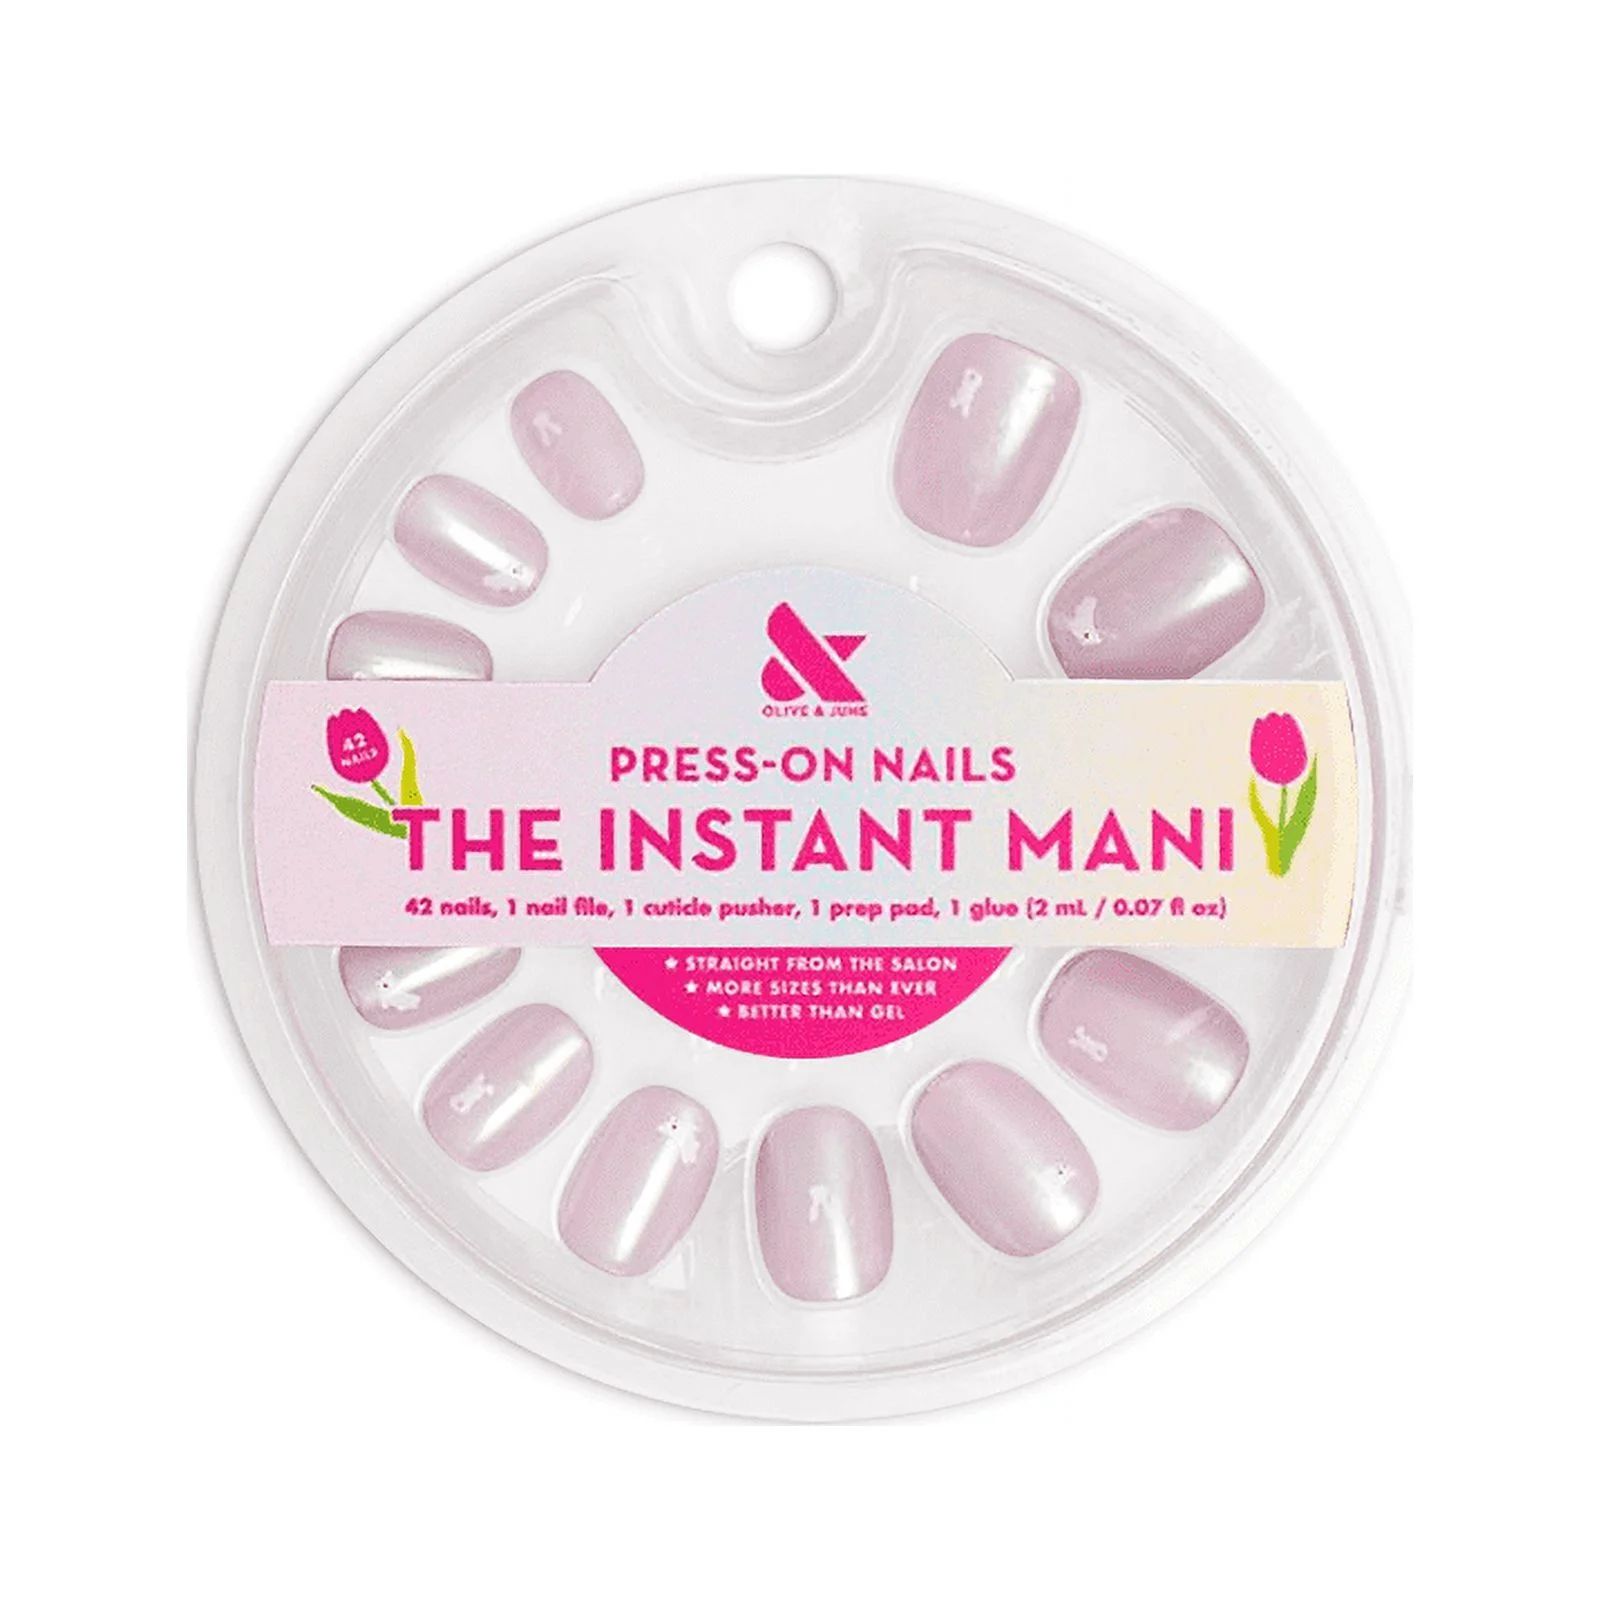 Olive & June Instant Mani Extra Short Squoval Press-On Nails, Pink, Hoppy Bunny, 42 Pieces | Walmart (US)